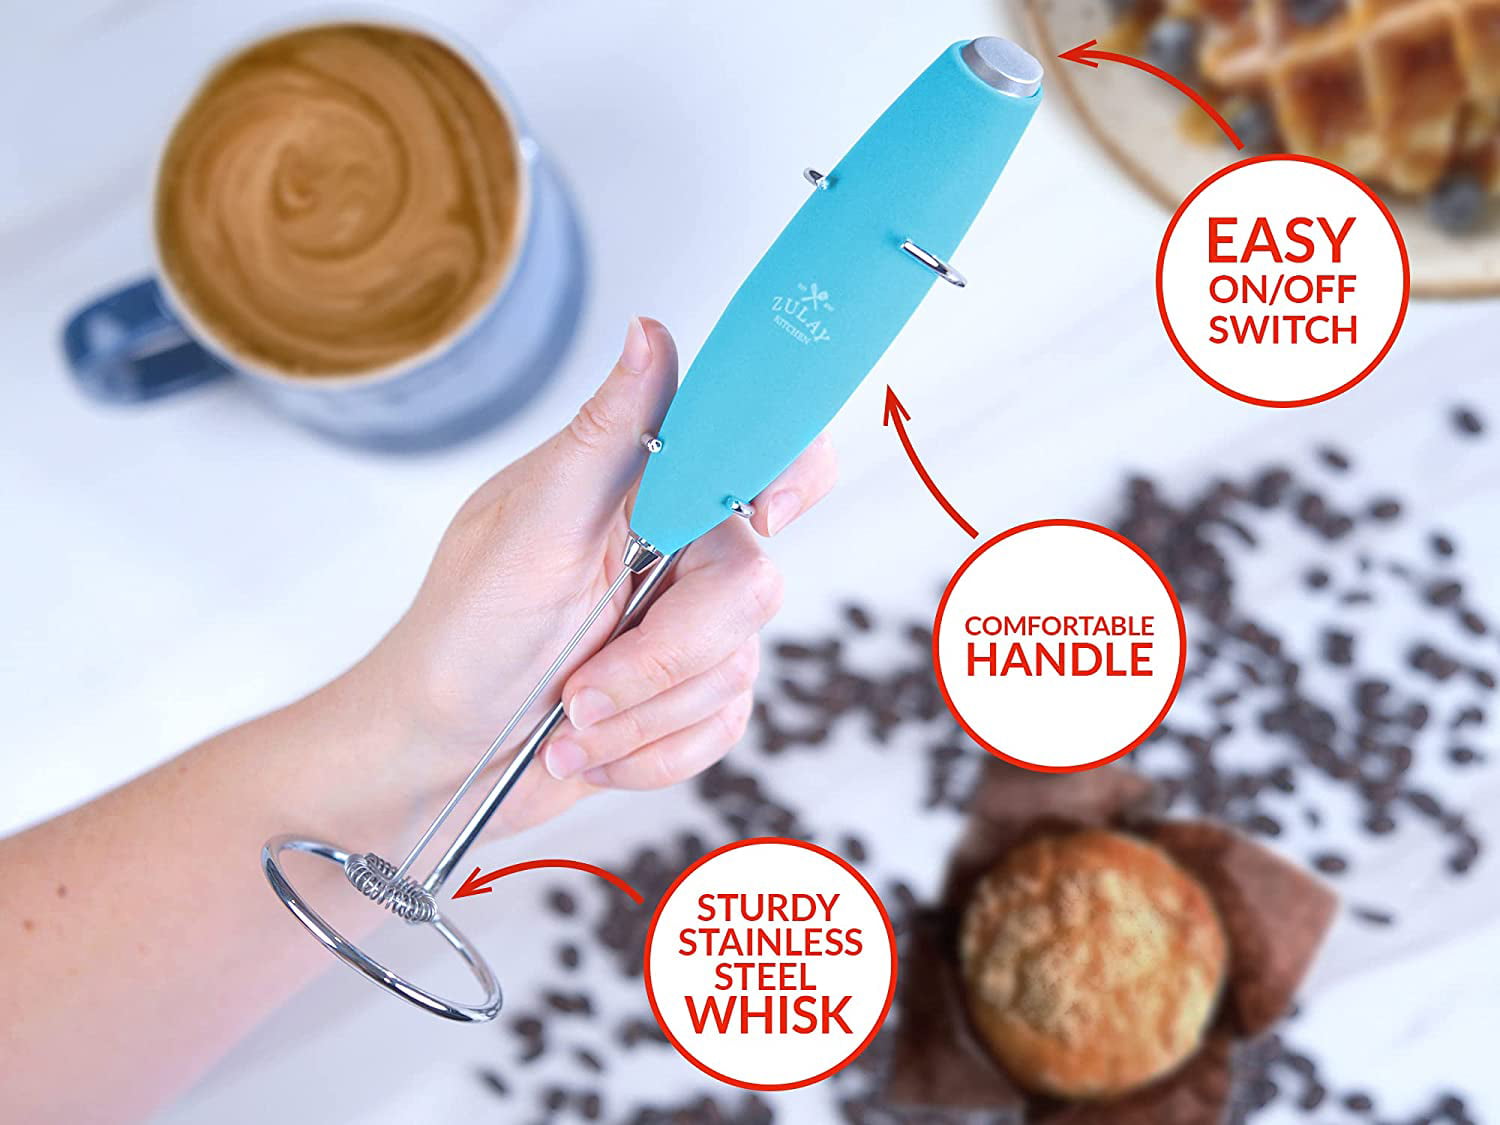 Zulay Powerful Milk Frother Handheld Foam Maker for Lattes - Whisk Drink  Mixer f - St. Simons Island.com